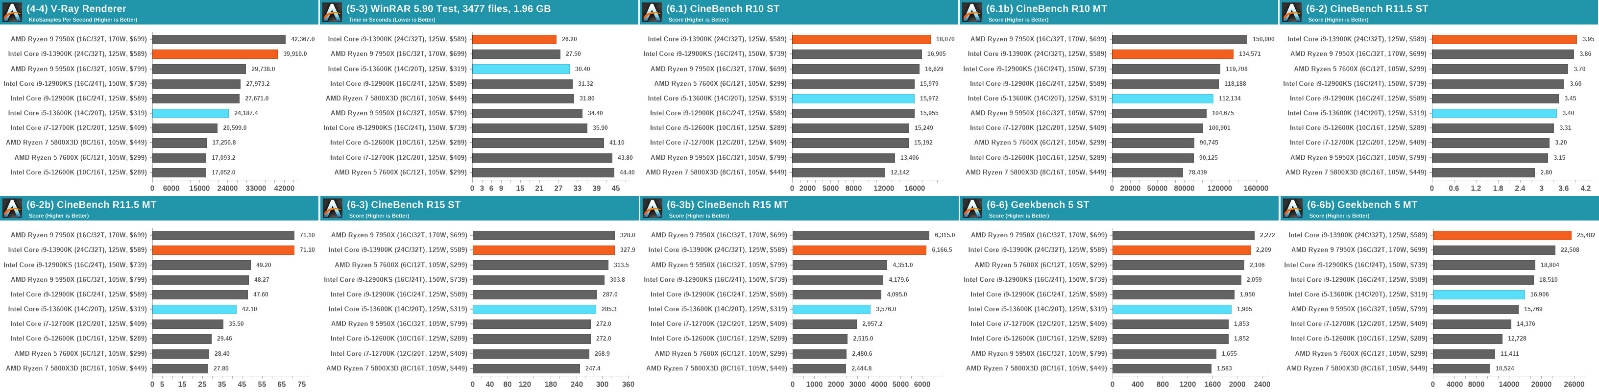 Intel's 13th generation Raptor Lake processor benchmark in Geekbench and Chestbench